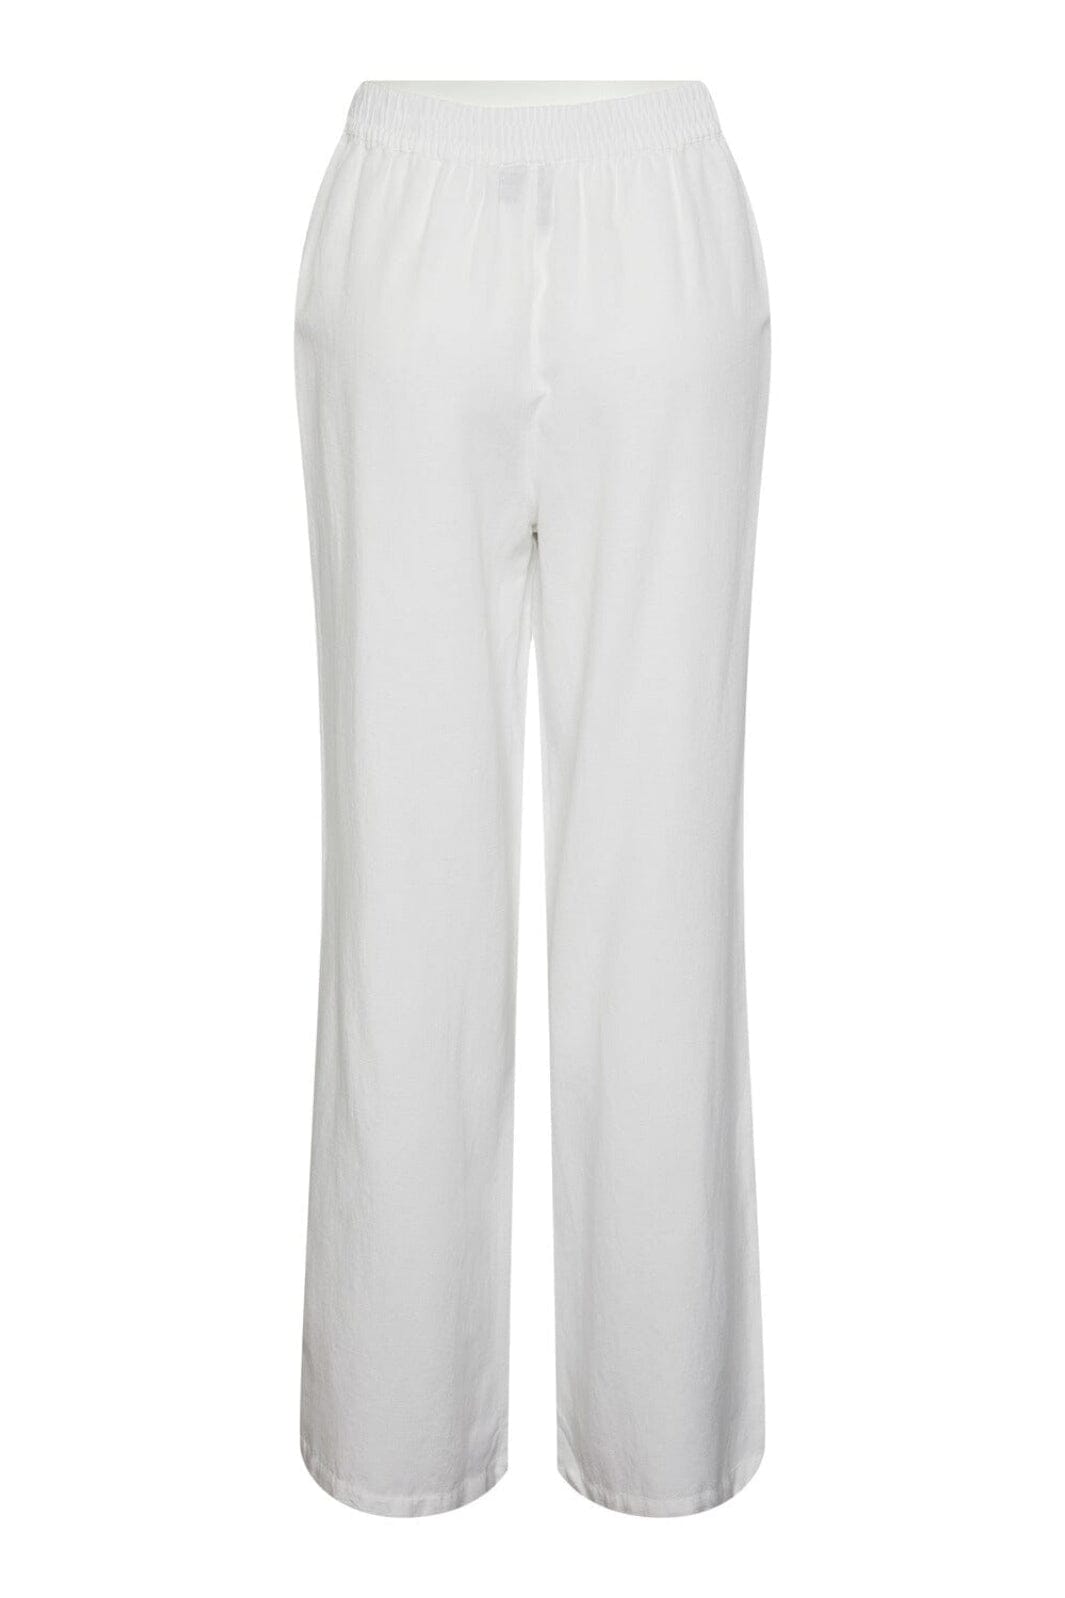 Pieces - Pcmilano Wide Pant - 4368661 Bright White Bukser 